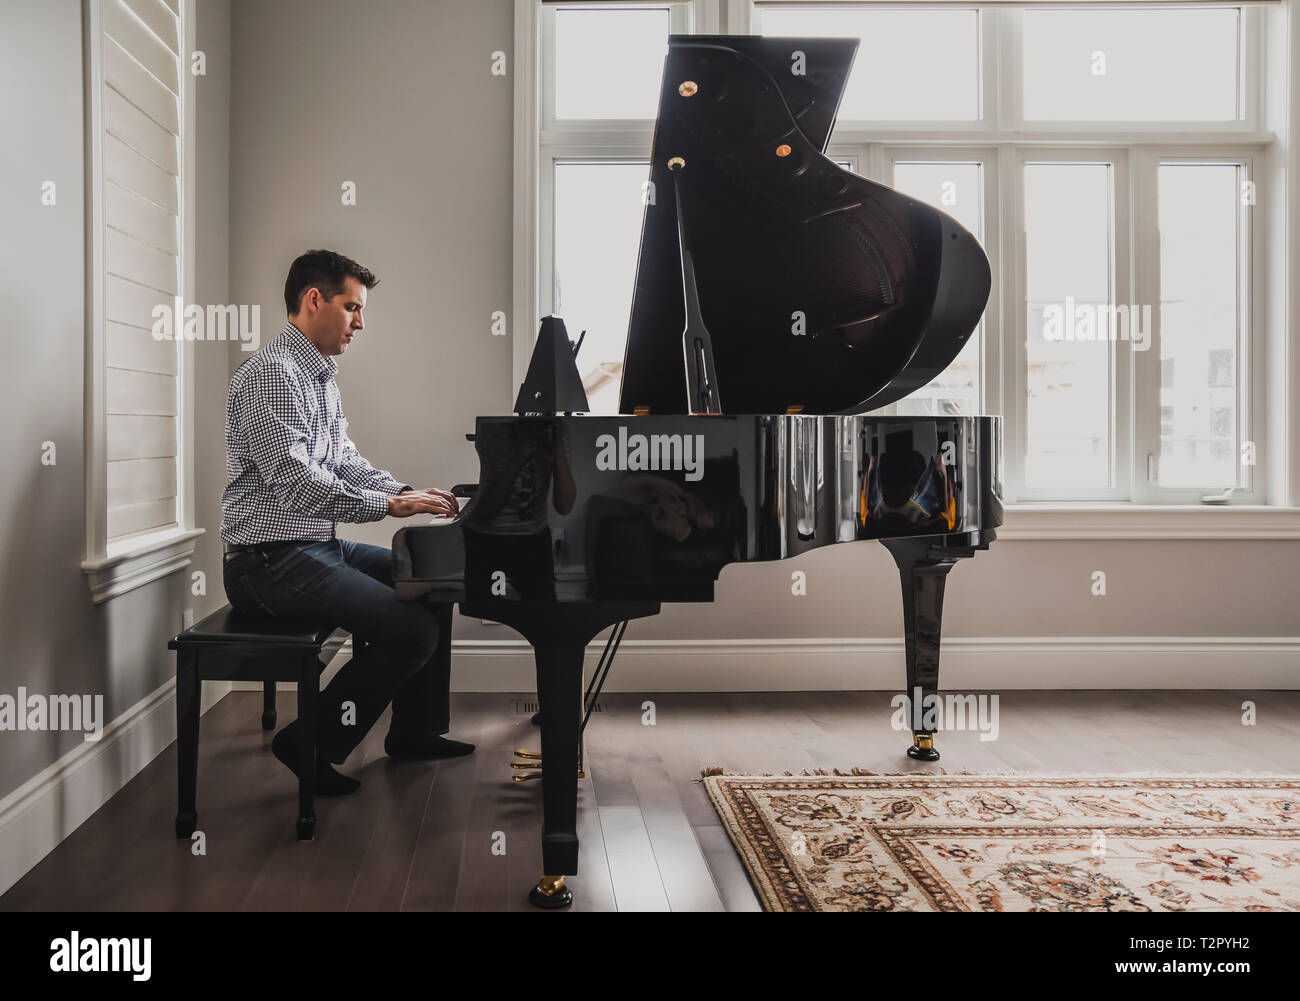 Man playing baby grand piano in a bright room Stock Photo